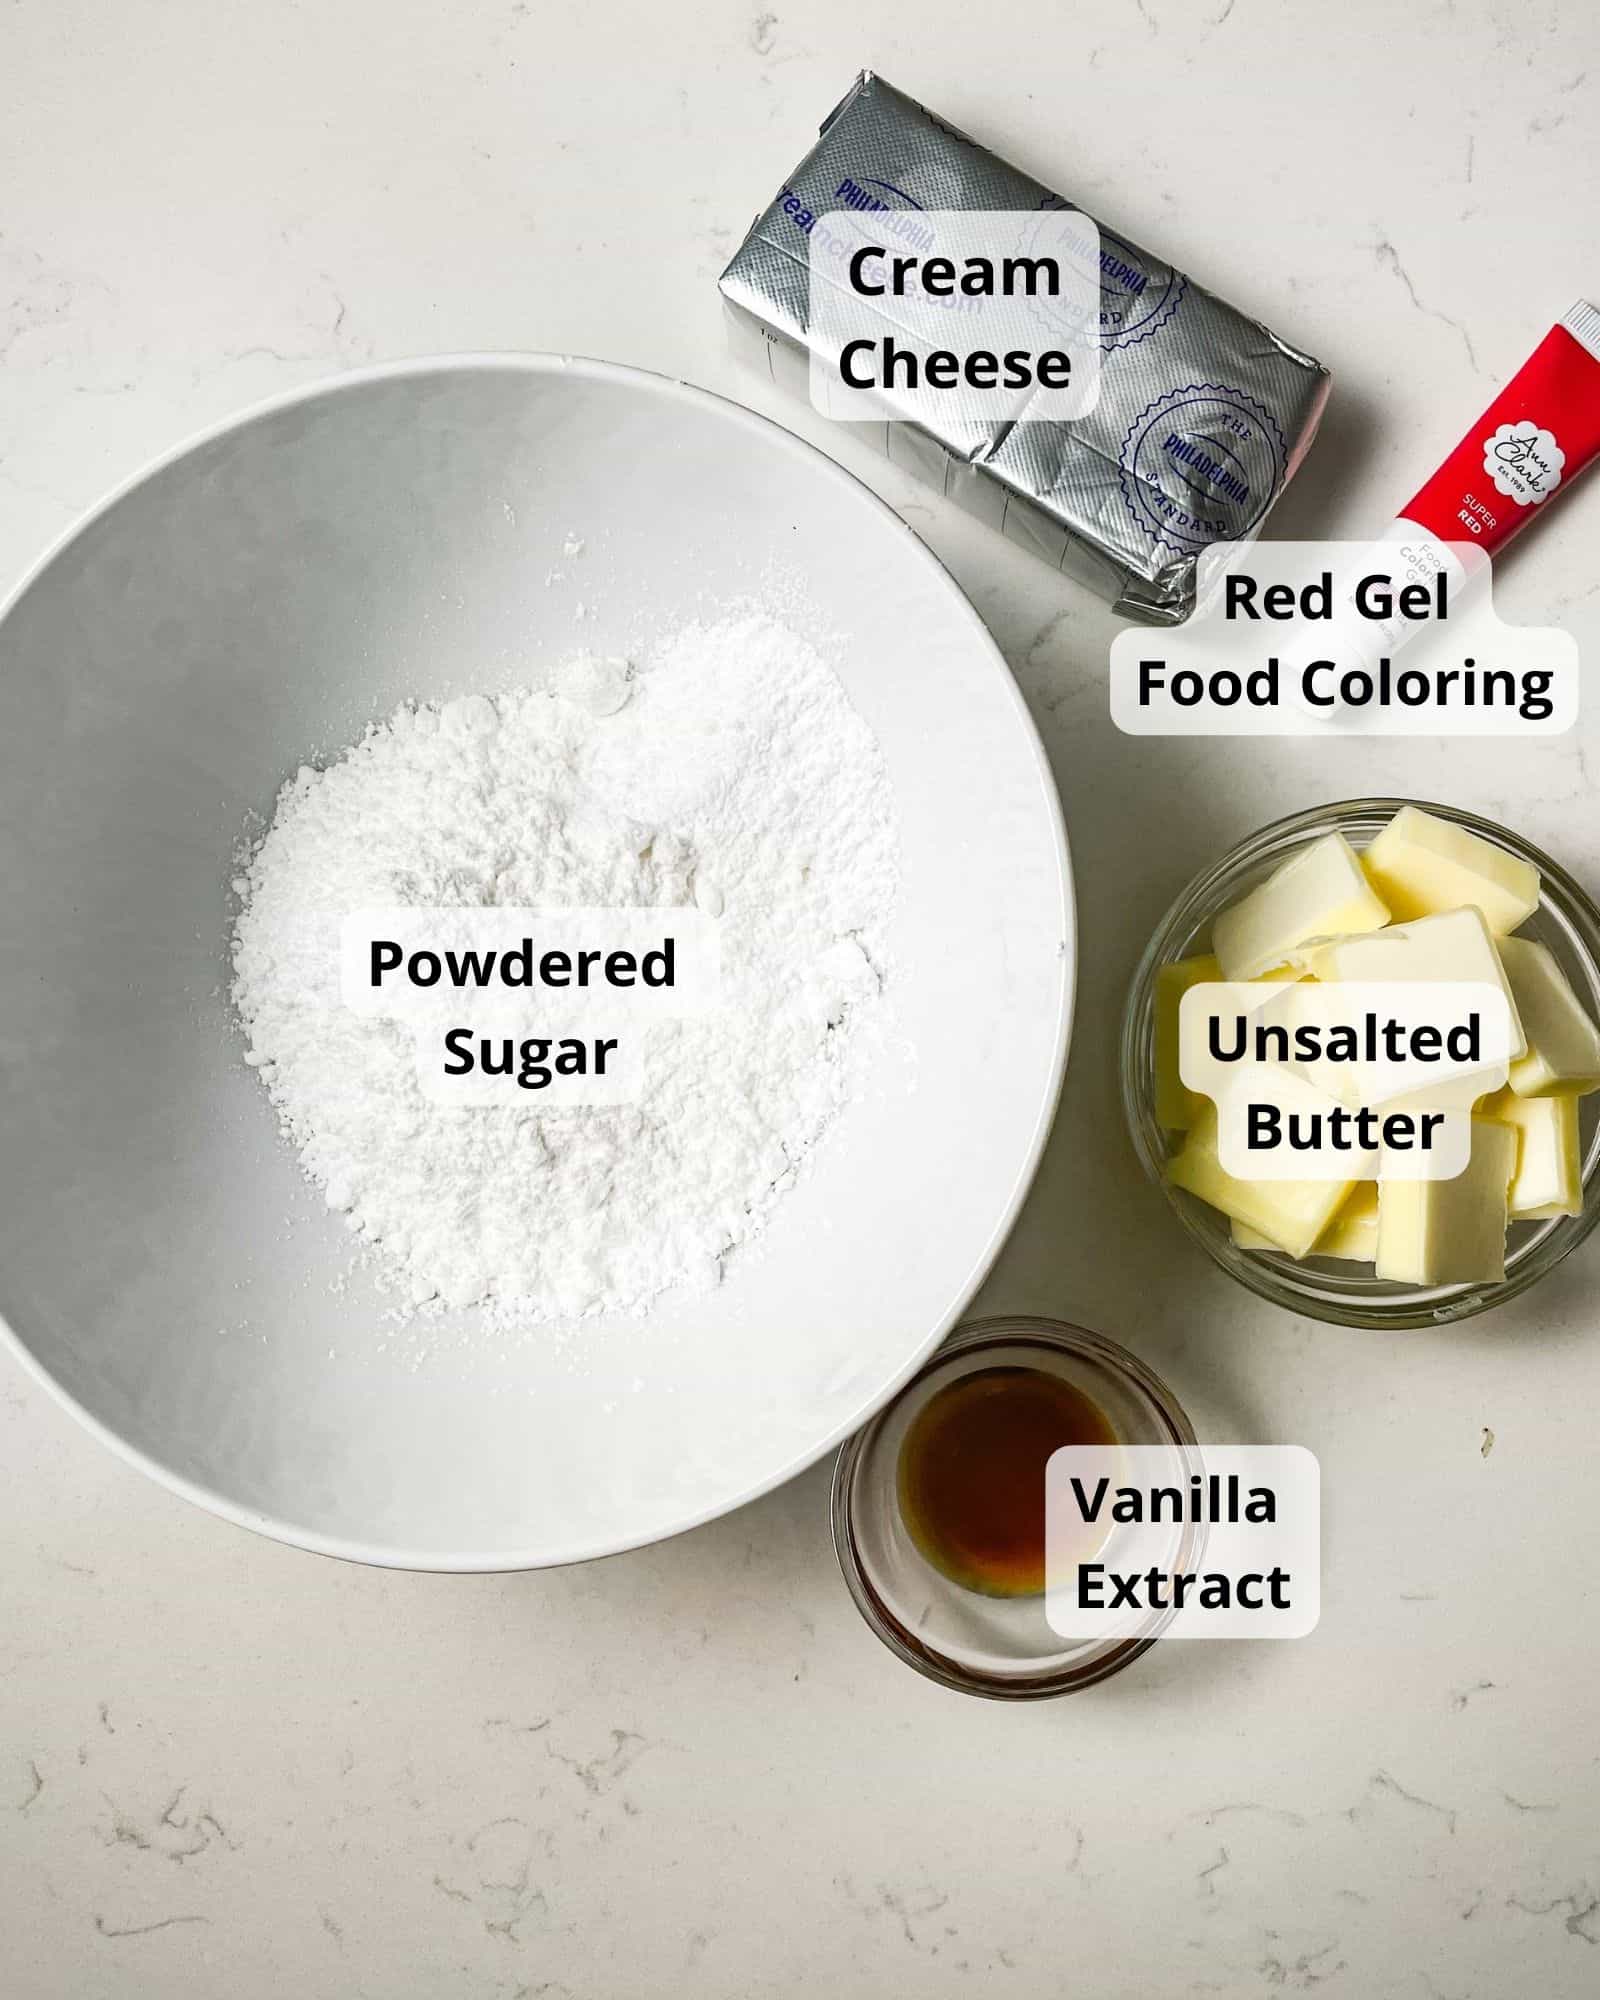 ingredients to make cream cheese frosting - powdered sugar, cream cheese, butter, red food coloring, and vanilla extract.